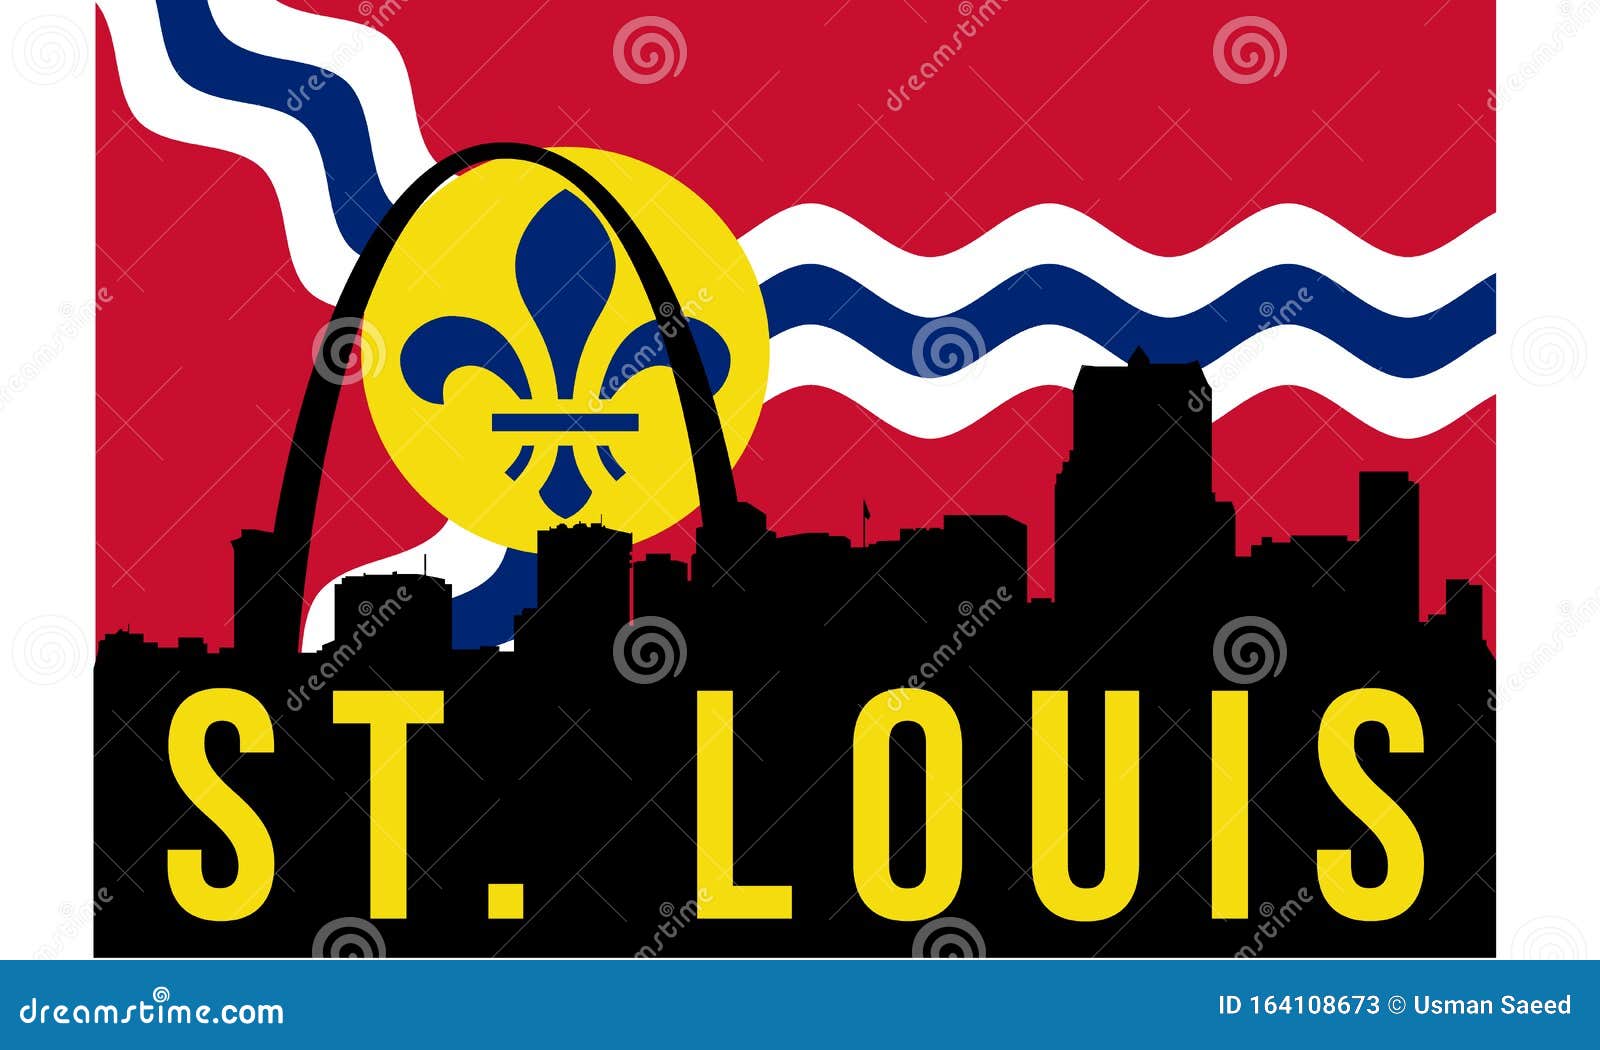 St. Louis City Skyline And Landmarks Silhouette, Black And White Design With Flag In Background ...